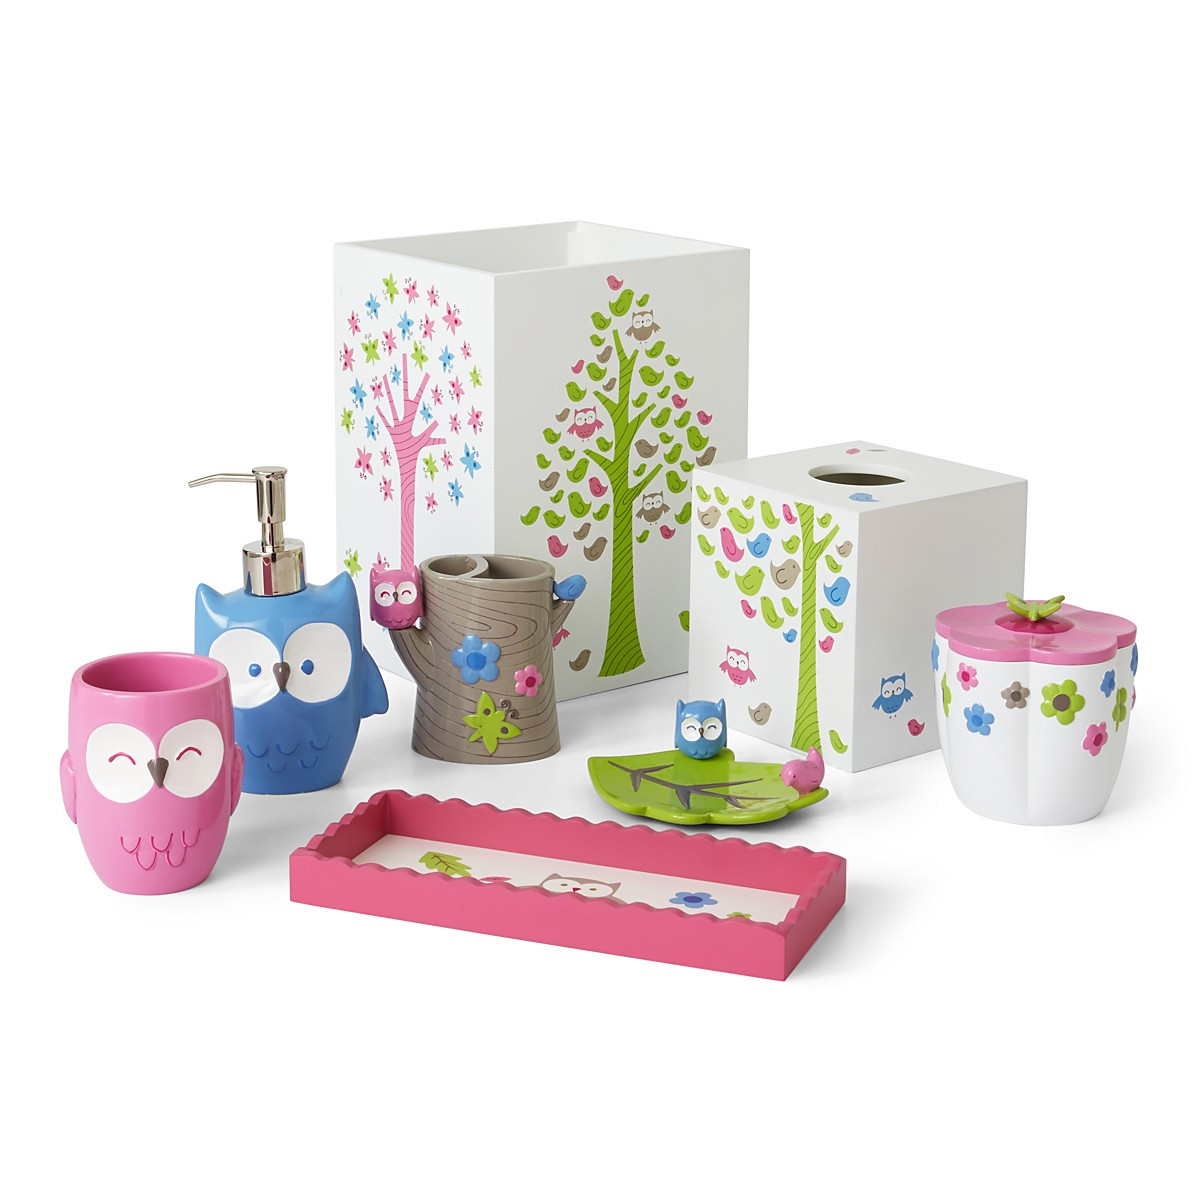 Bathroom Sets For Kids
 The Benefits of Using Kids Bathroom Accessories Sets